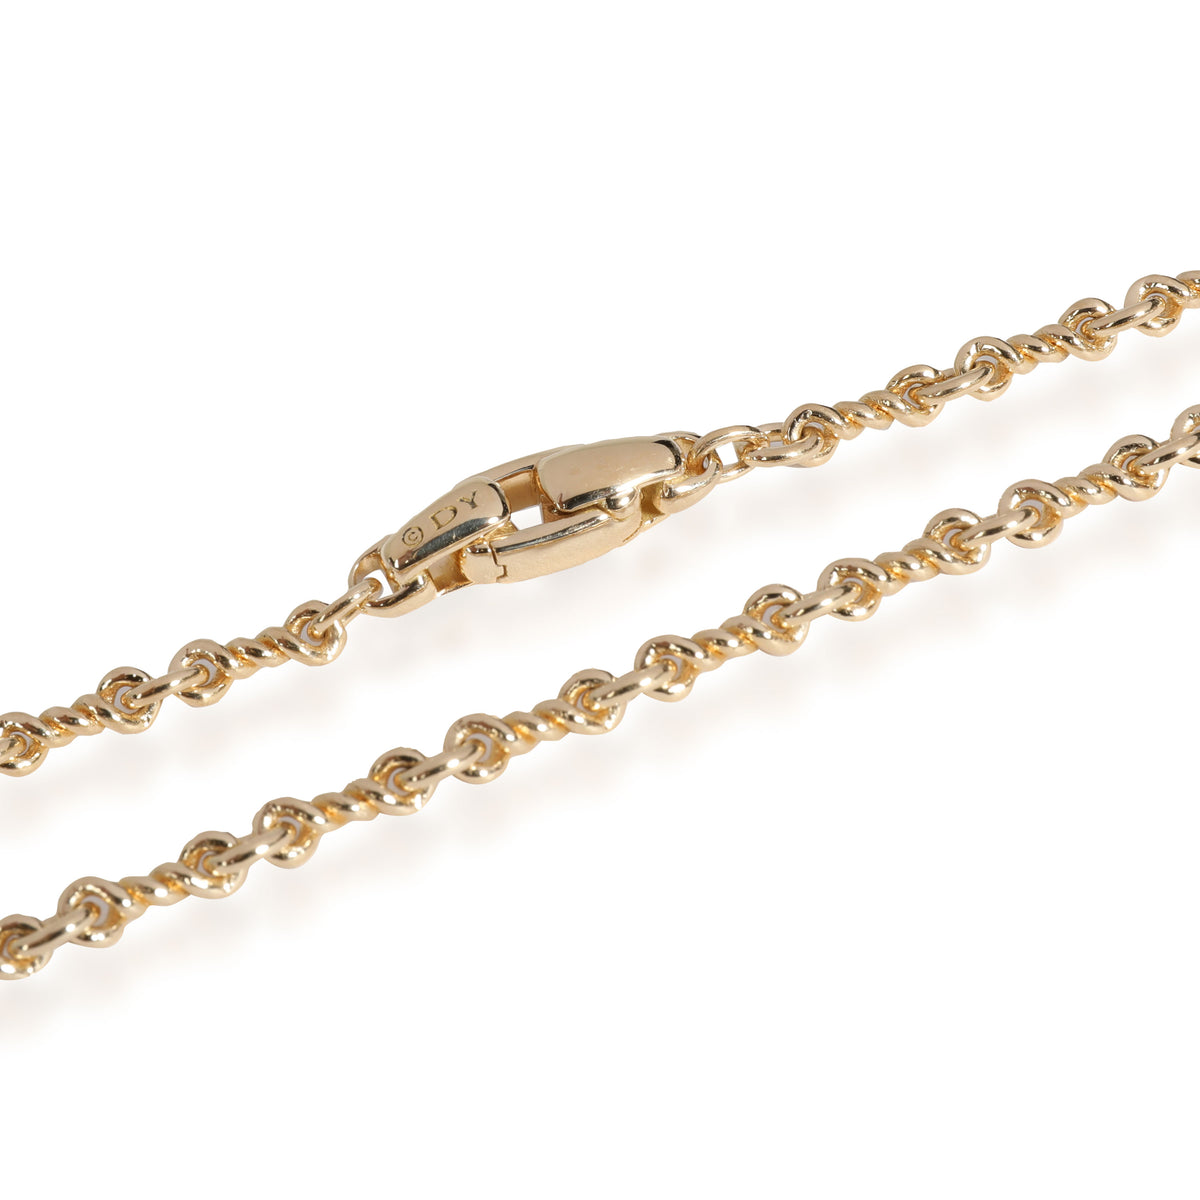 David Yurman Continuance Cable Twist Necklace in 18k Yellow Gold